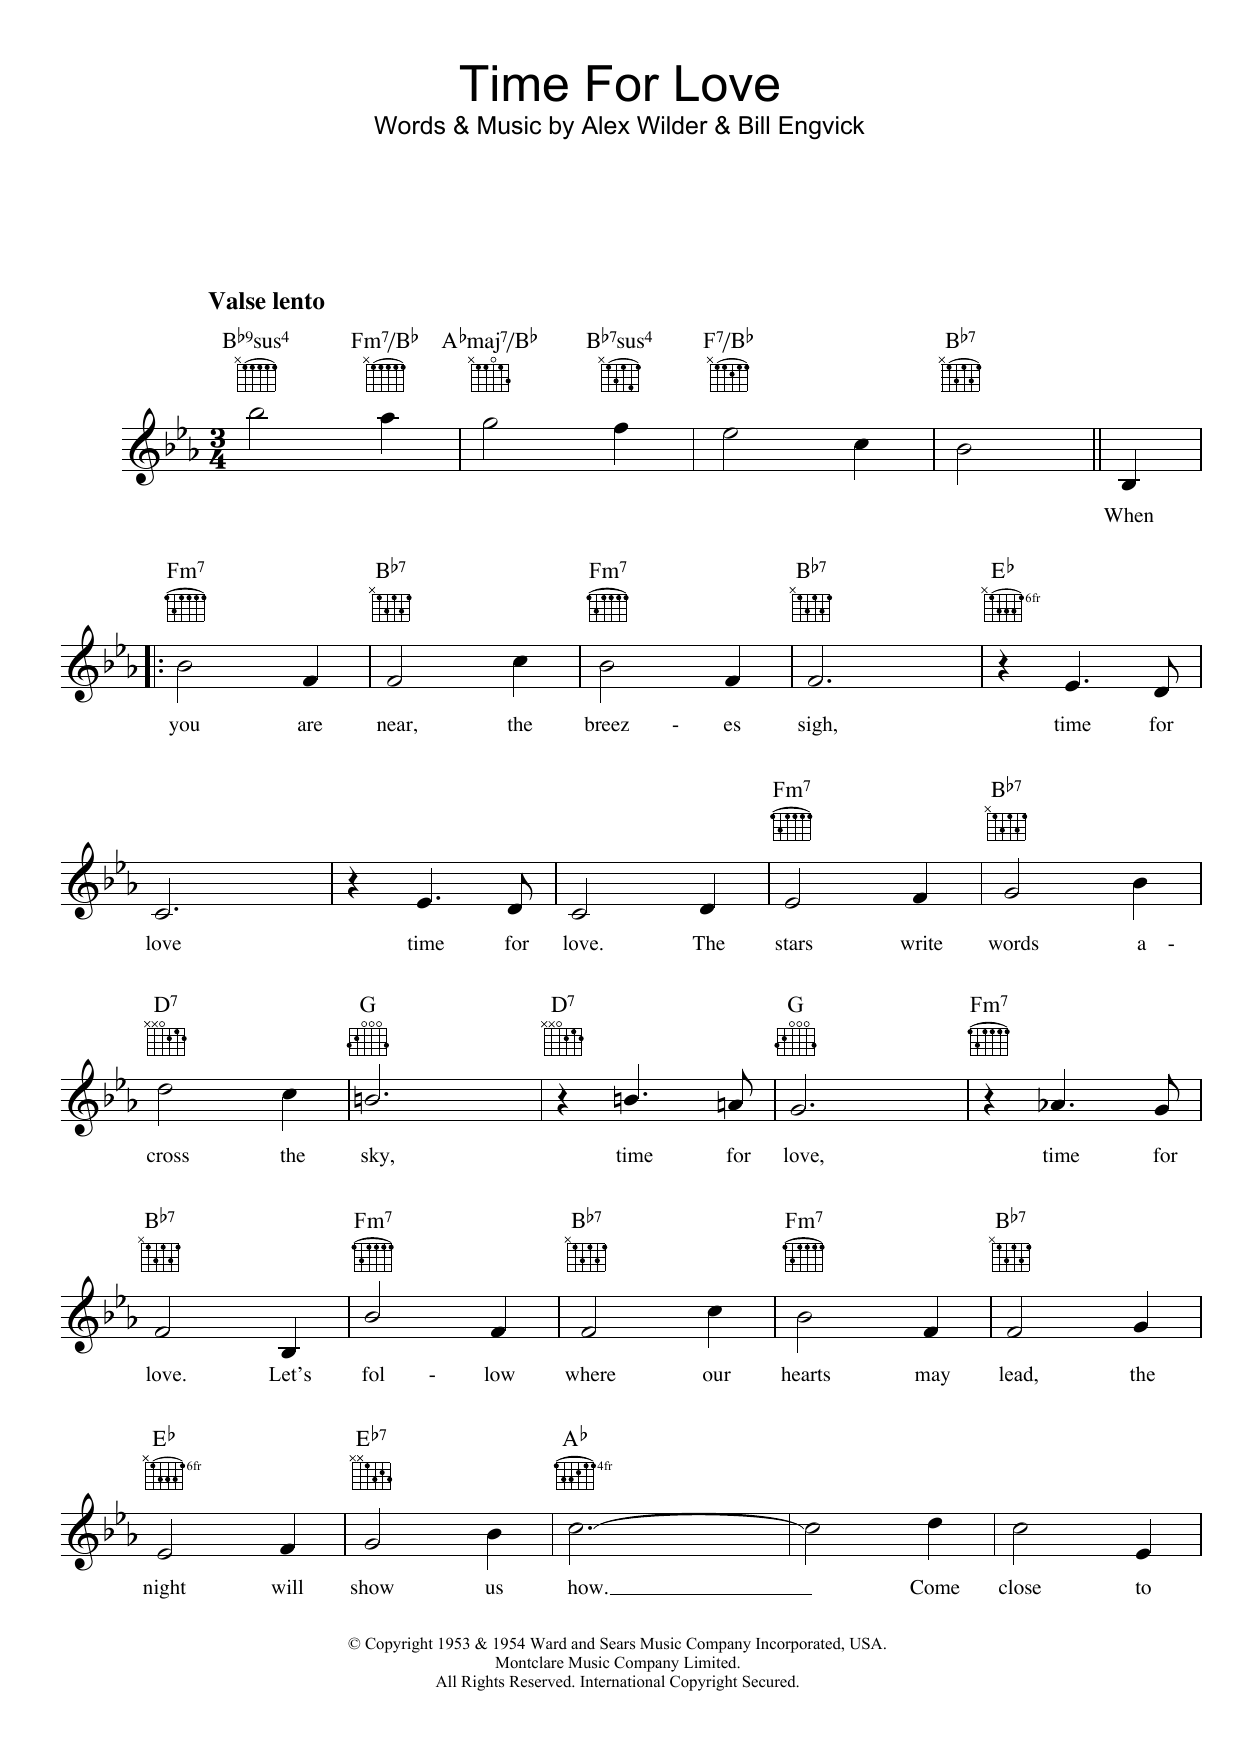 Download Marlene Dietrich Time For Love Sheet Music